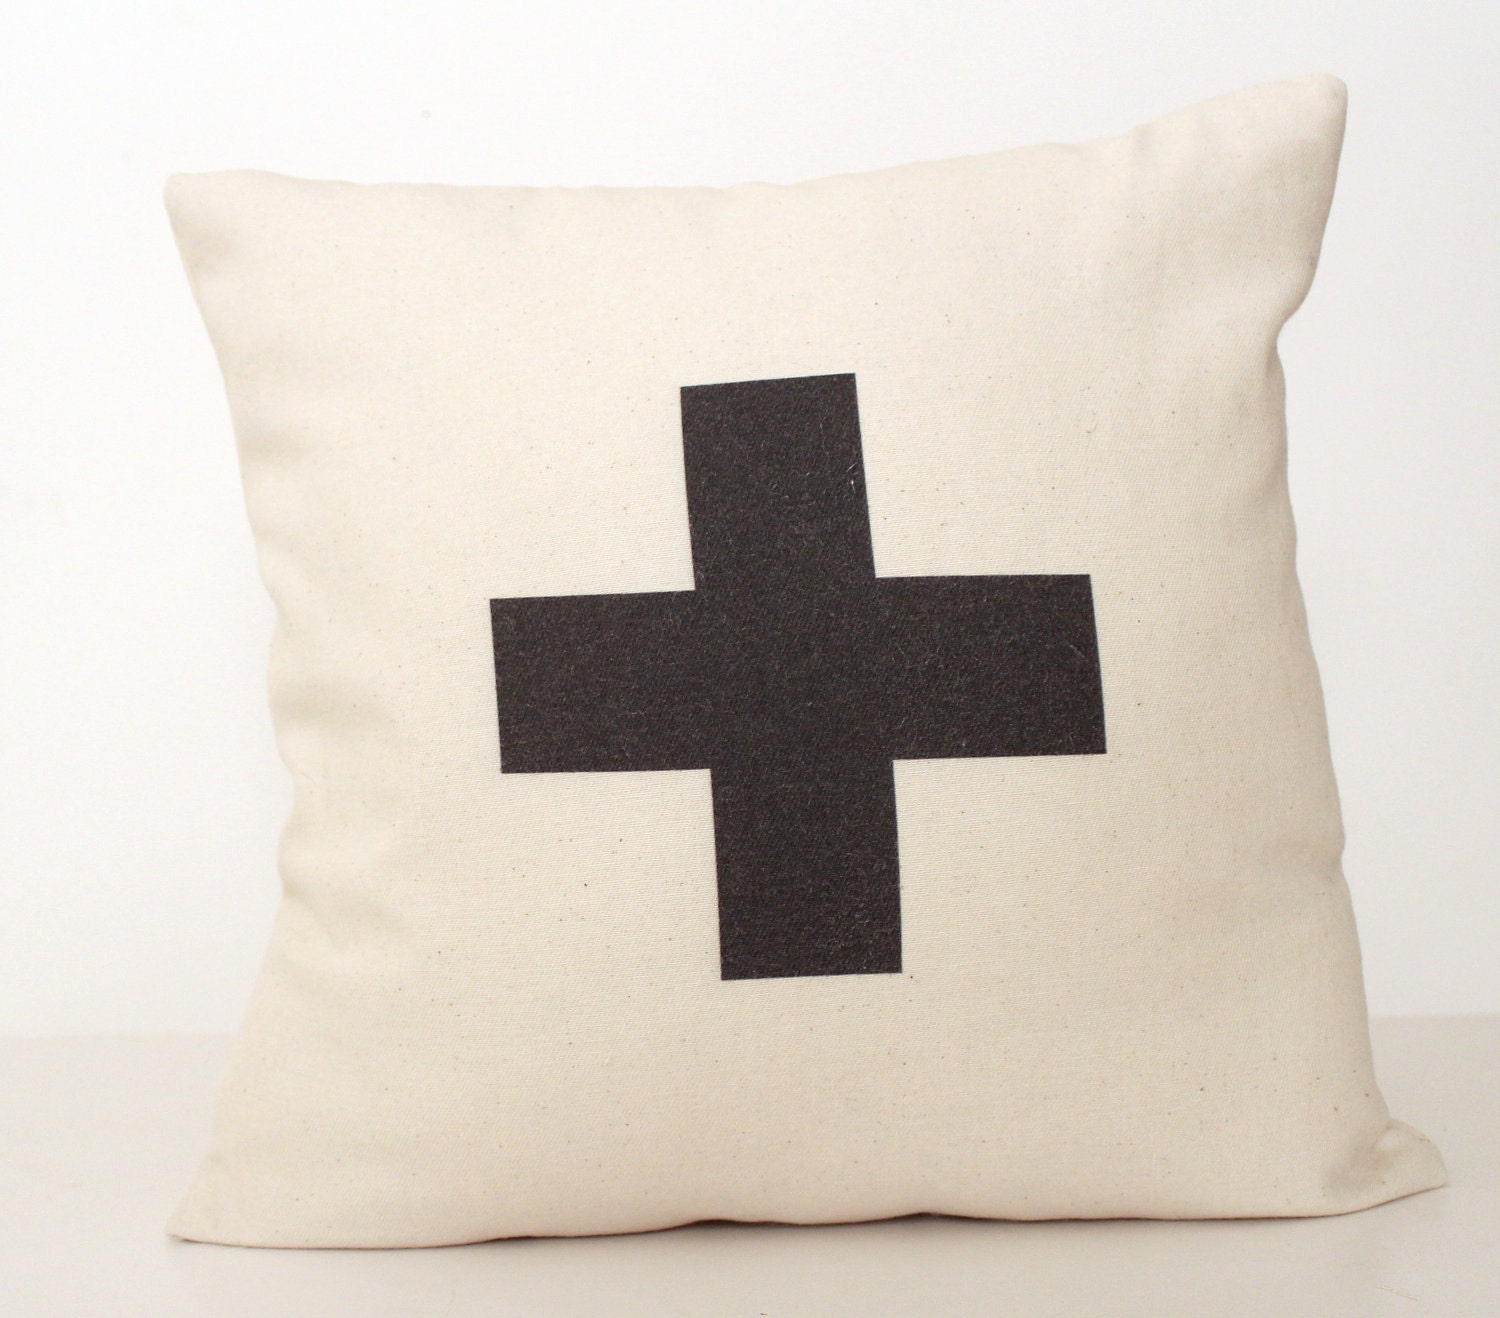 Plus Typographic / Swiss Cross  16x16 inch  Pillow Cover, Throw Cushion, Minimalist and chic